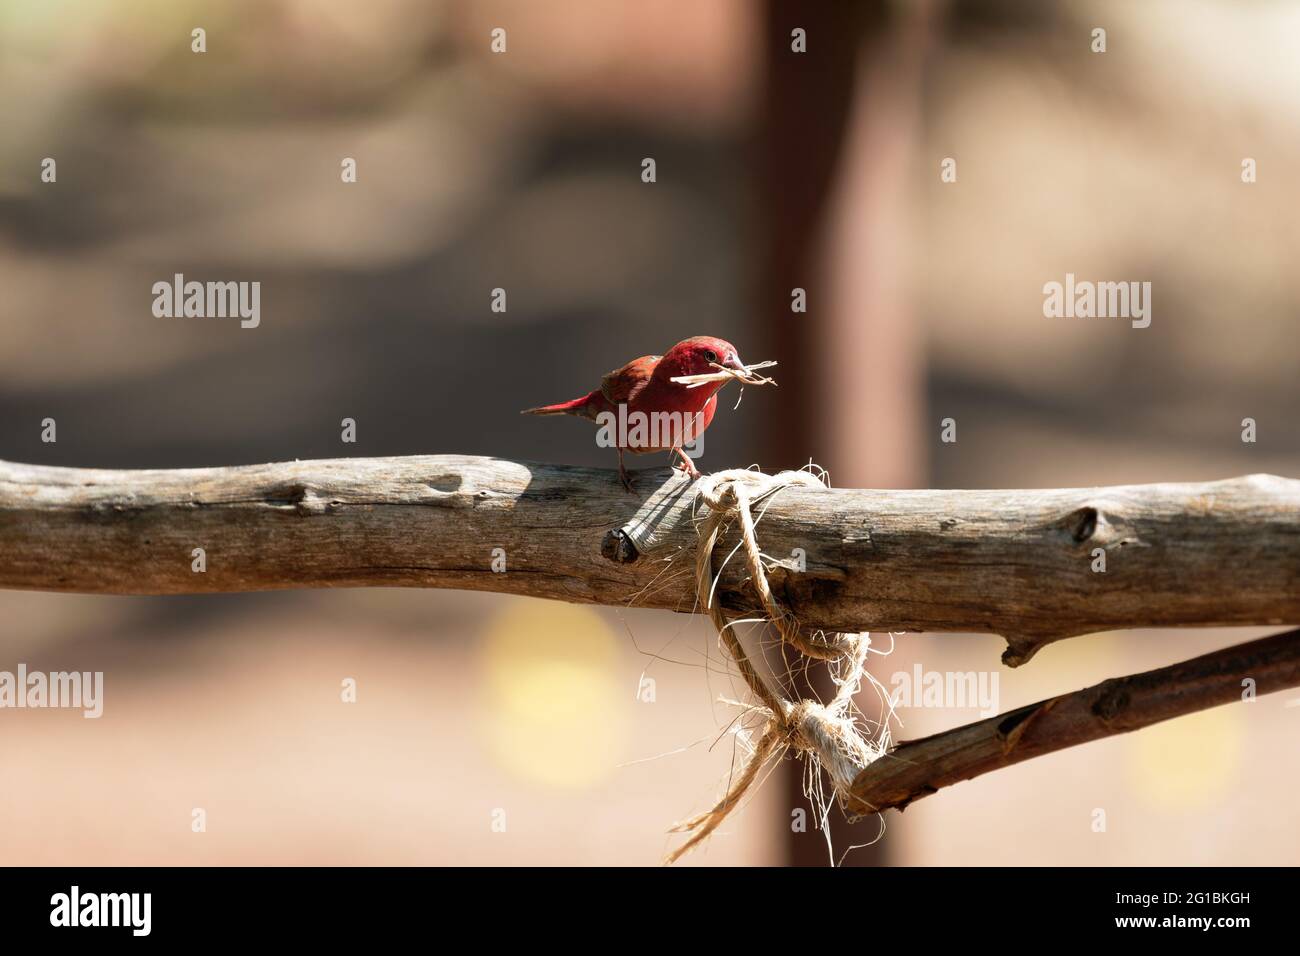 A fiery red Senegalese amaranth sits on a wooden fence with nesting material in its beak Stock Photo